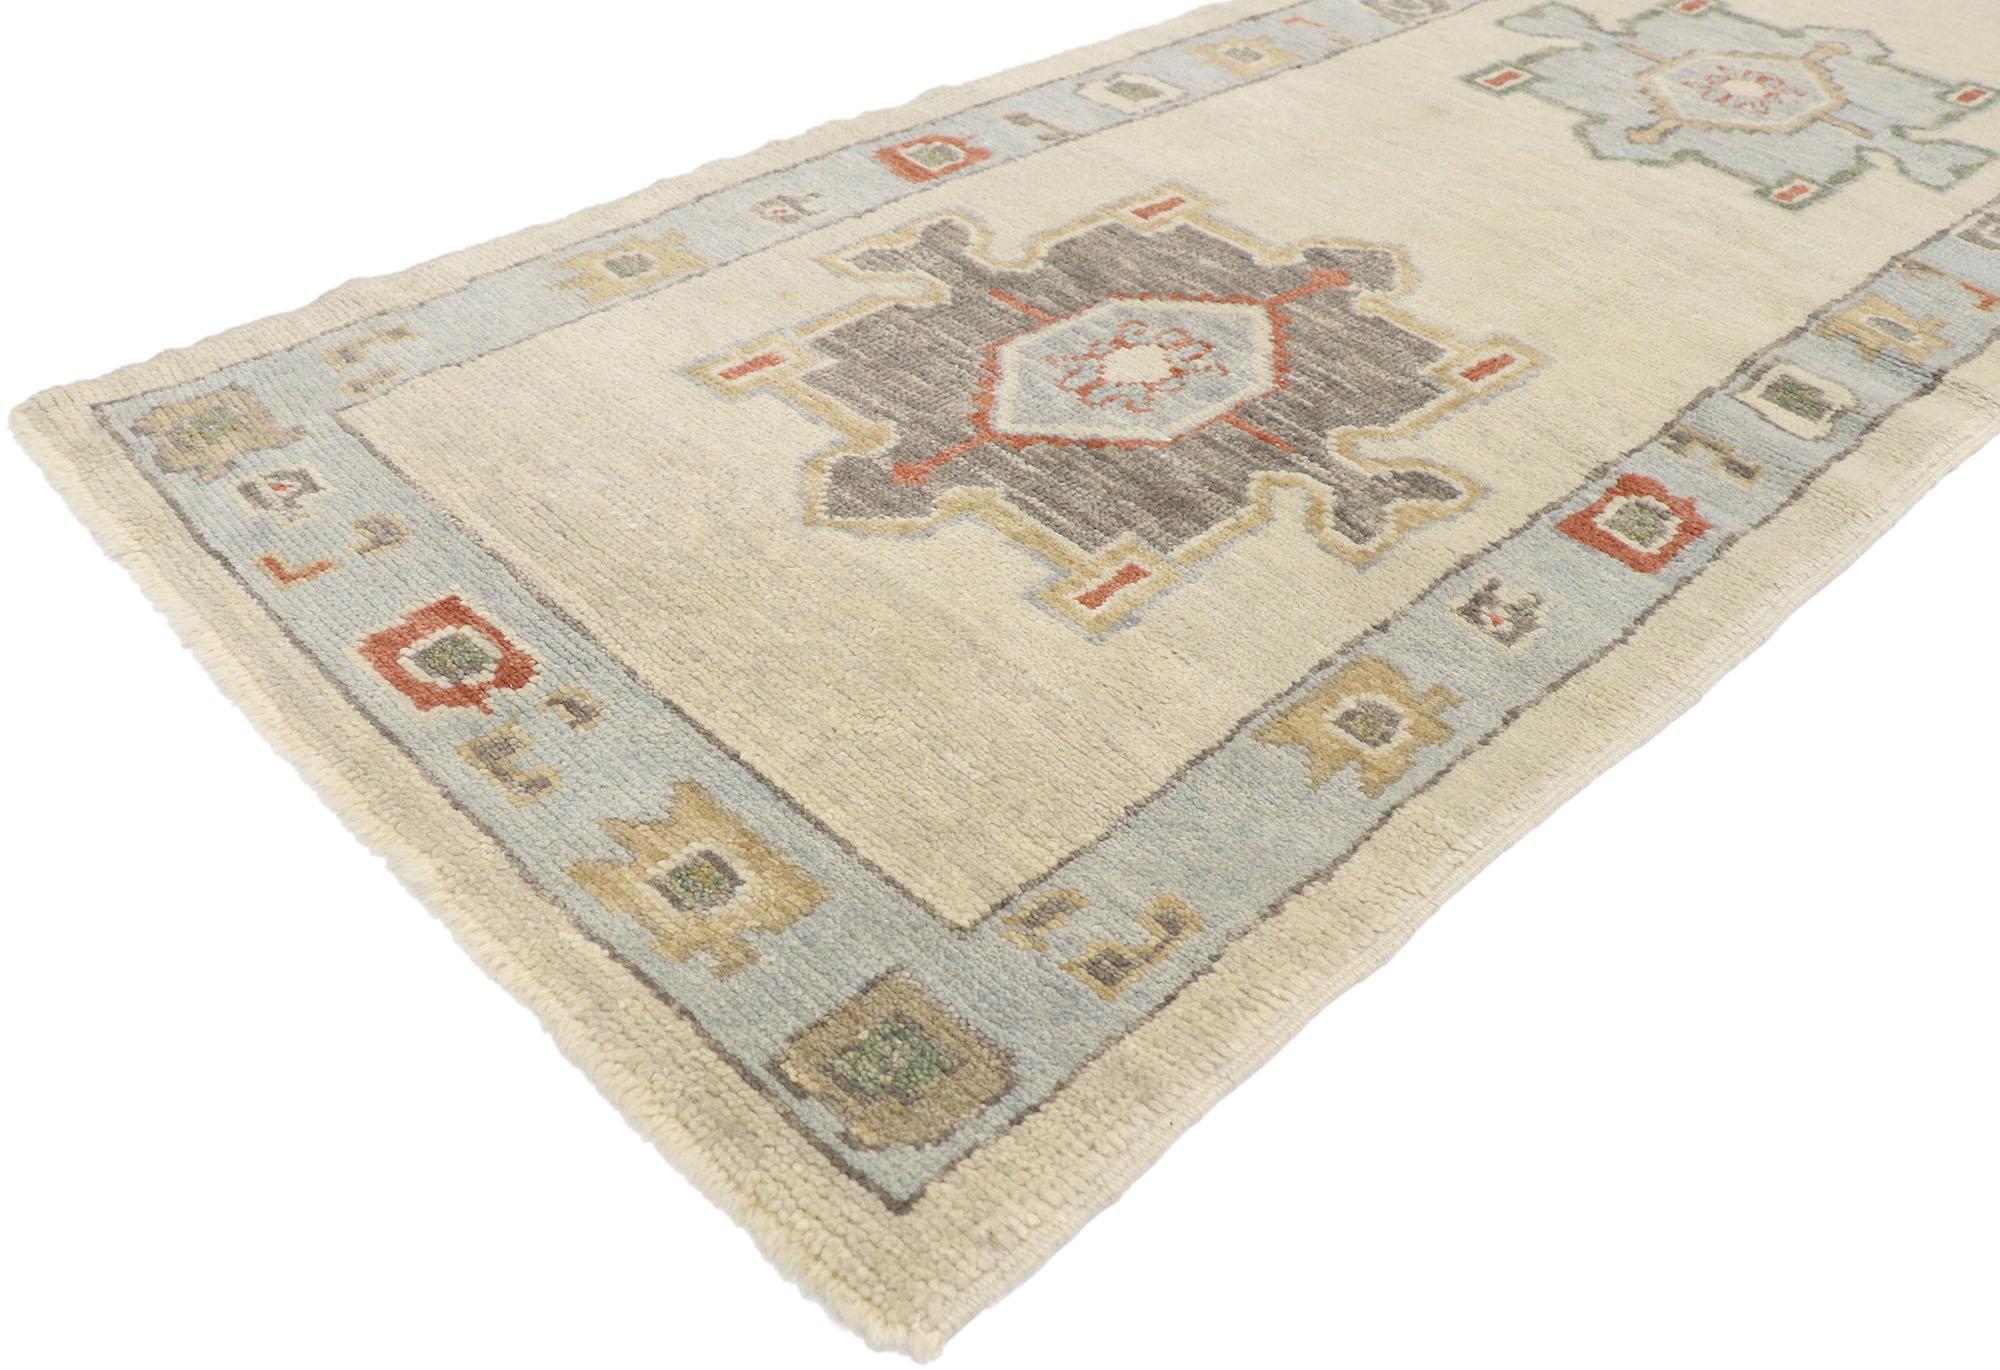 53540 New Contemporary Turkish Oushak runner with Modern Transitional Style 02'11 x 16'04. Simplicity meets modern style in this hand-knotted wool contemporary Turkish Oushak runner. The abrashed oatmeal colored field features five amulets patterned